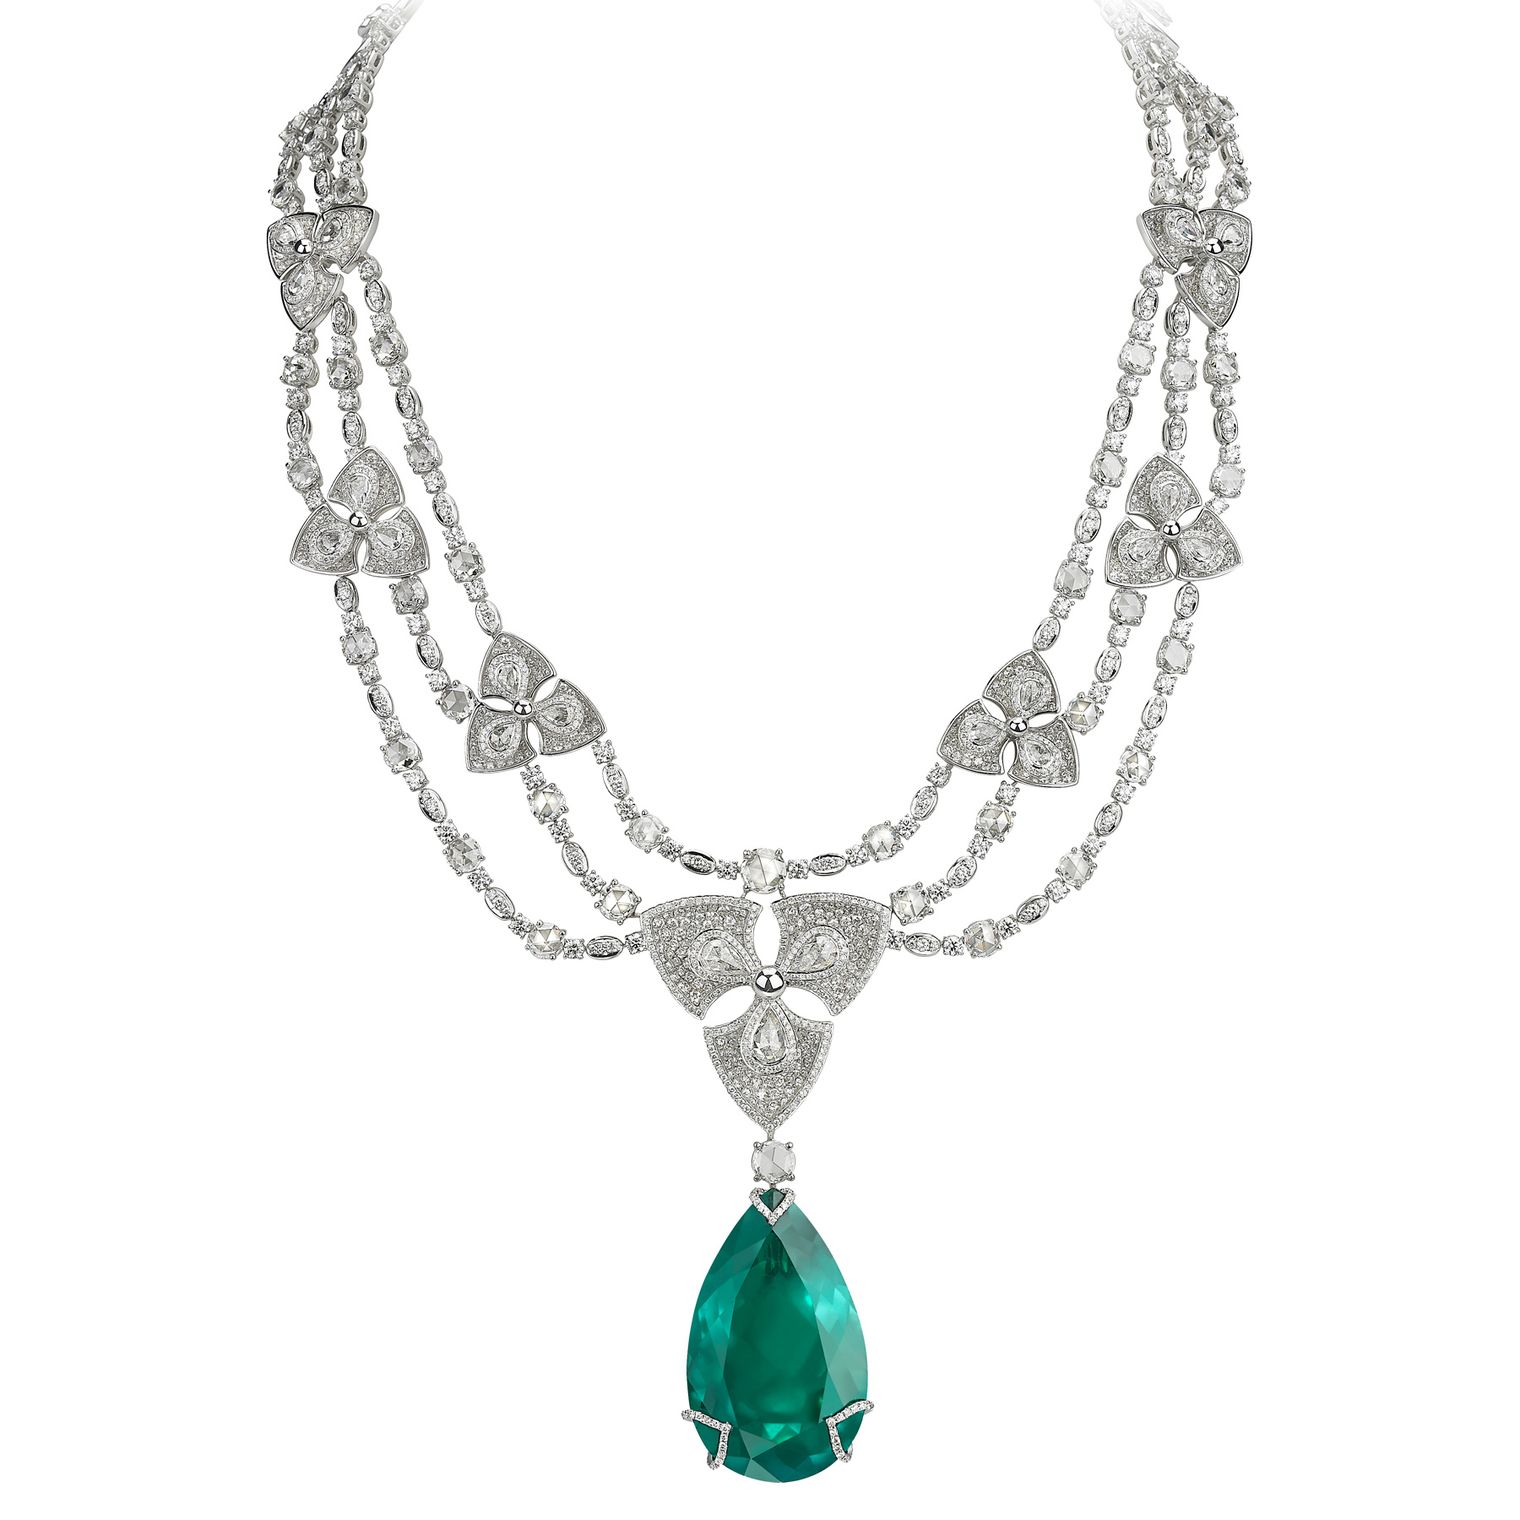 Pear-shaped Colombian emerald necklace with diamonds